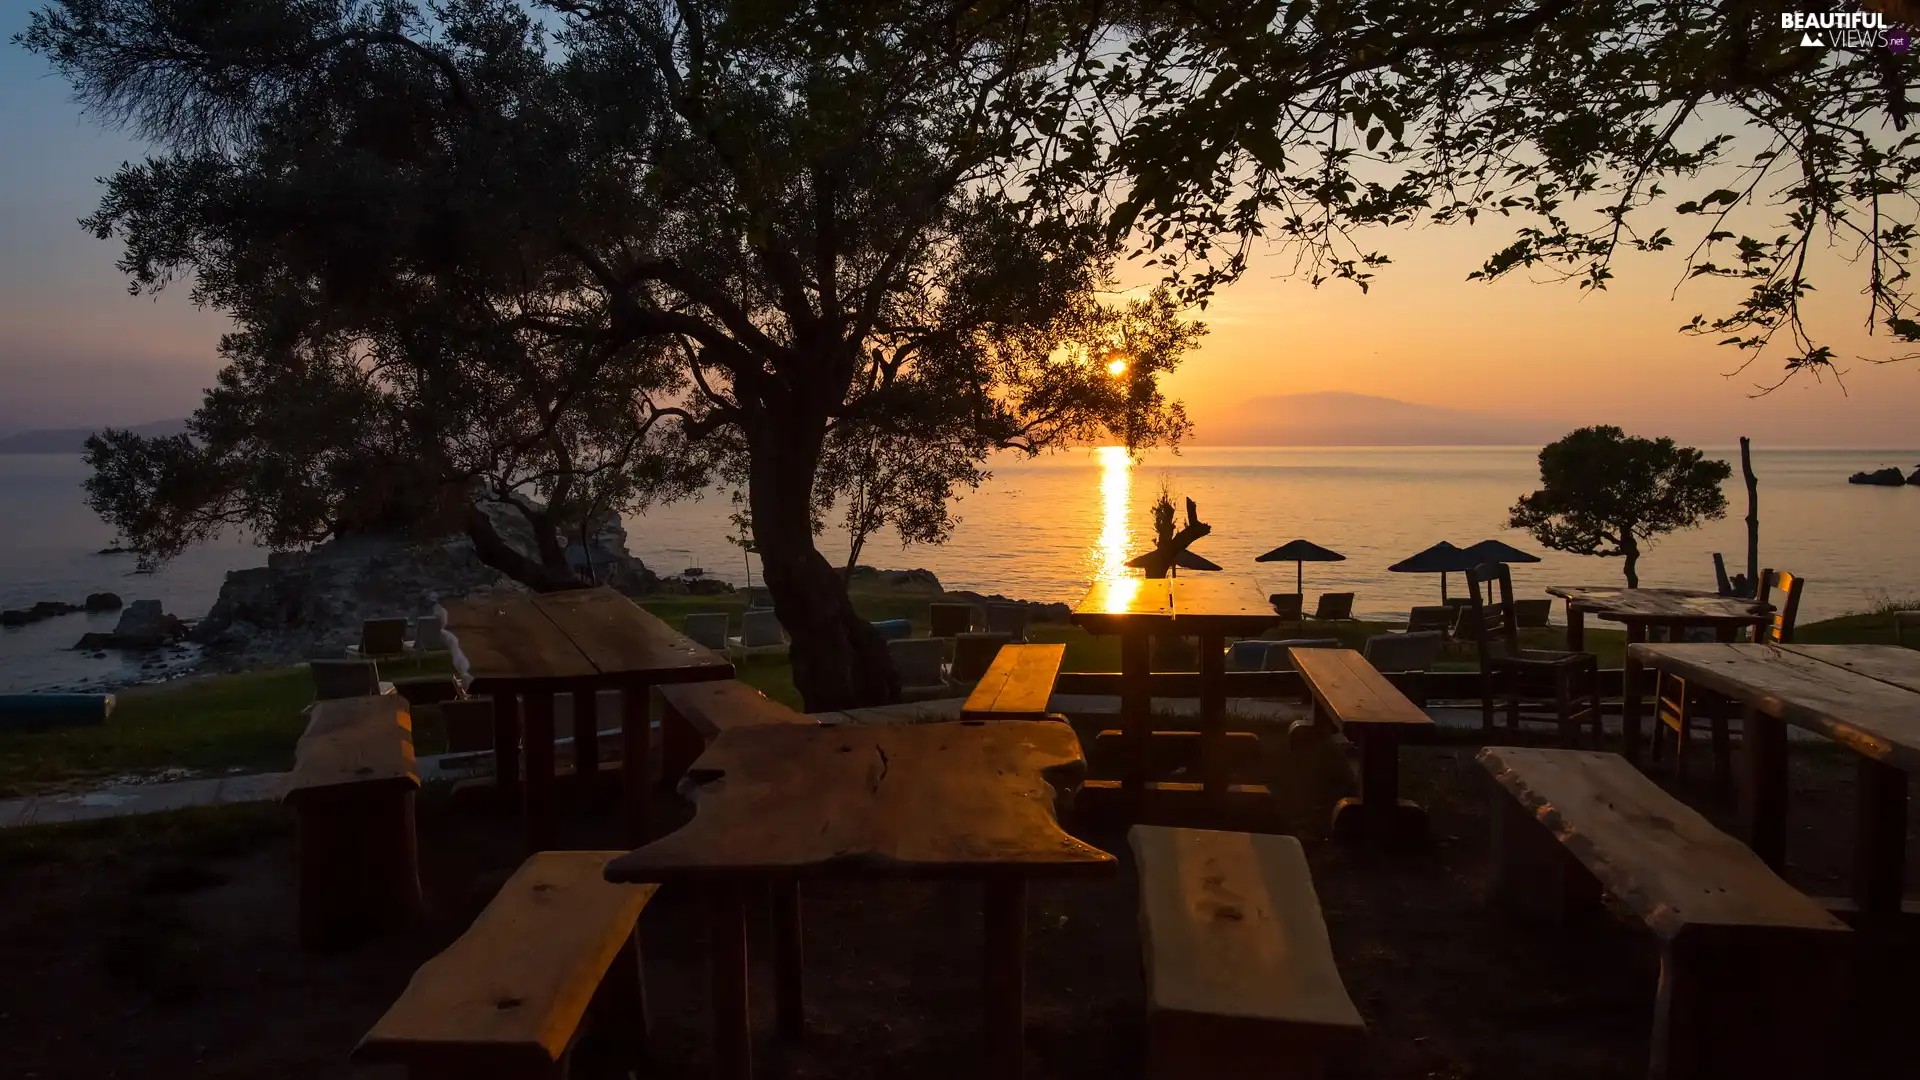 Great Sunsets, sea, bench, trees, tables